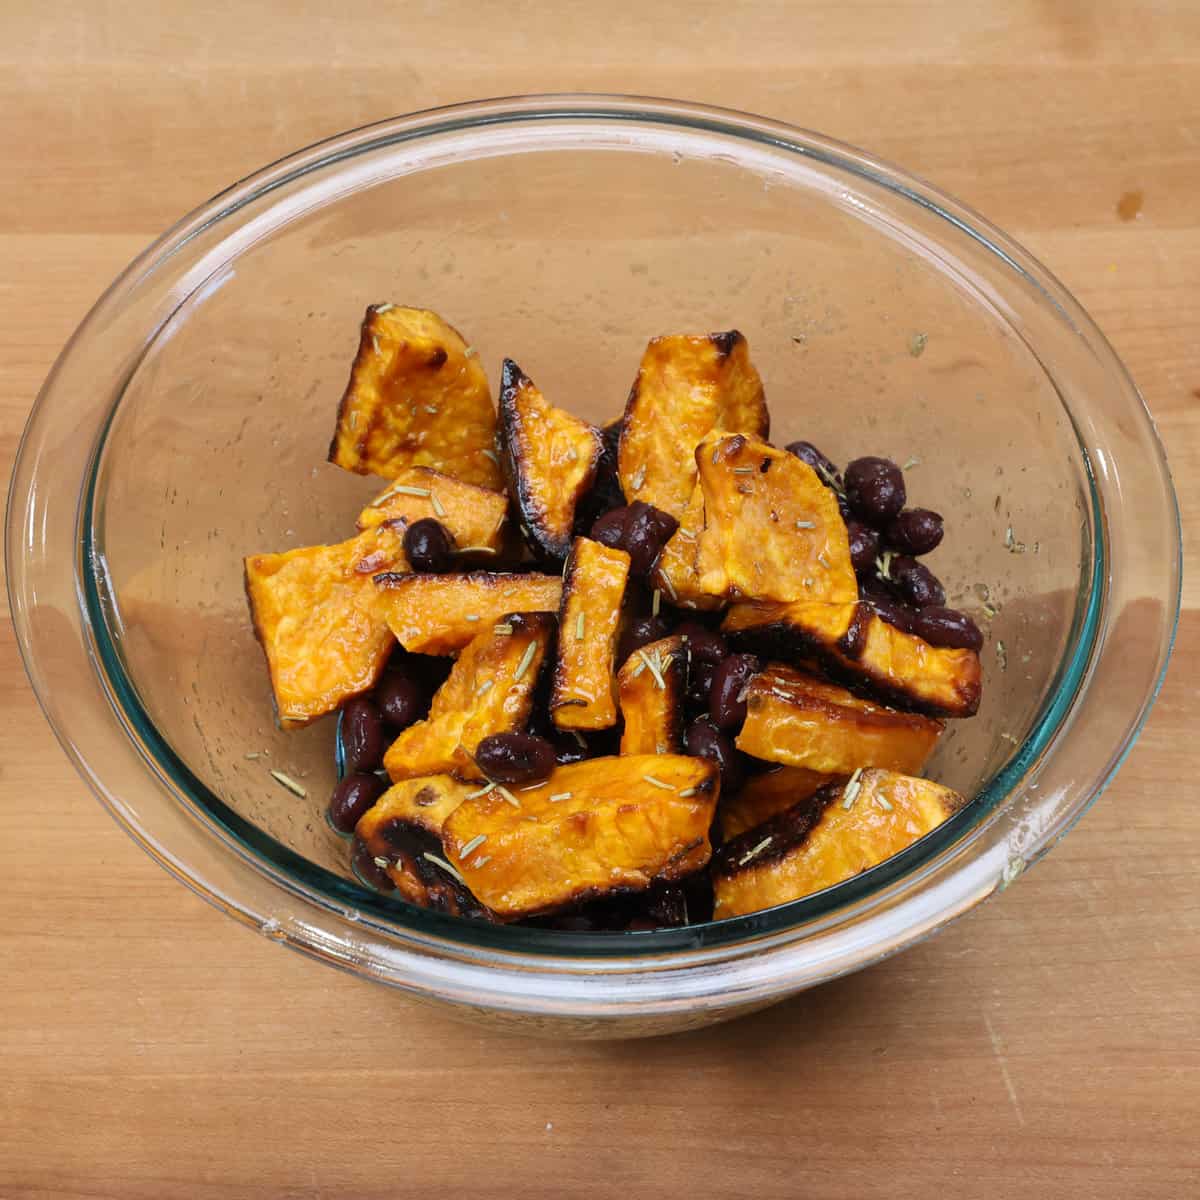 roasted sweet potatoes and black beans tossed in a vinaigrette in a mixing bowl.